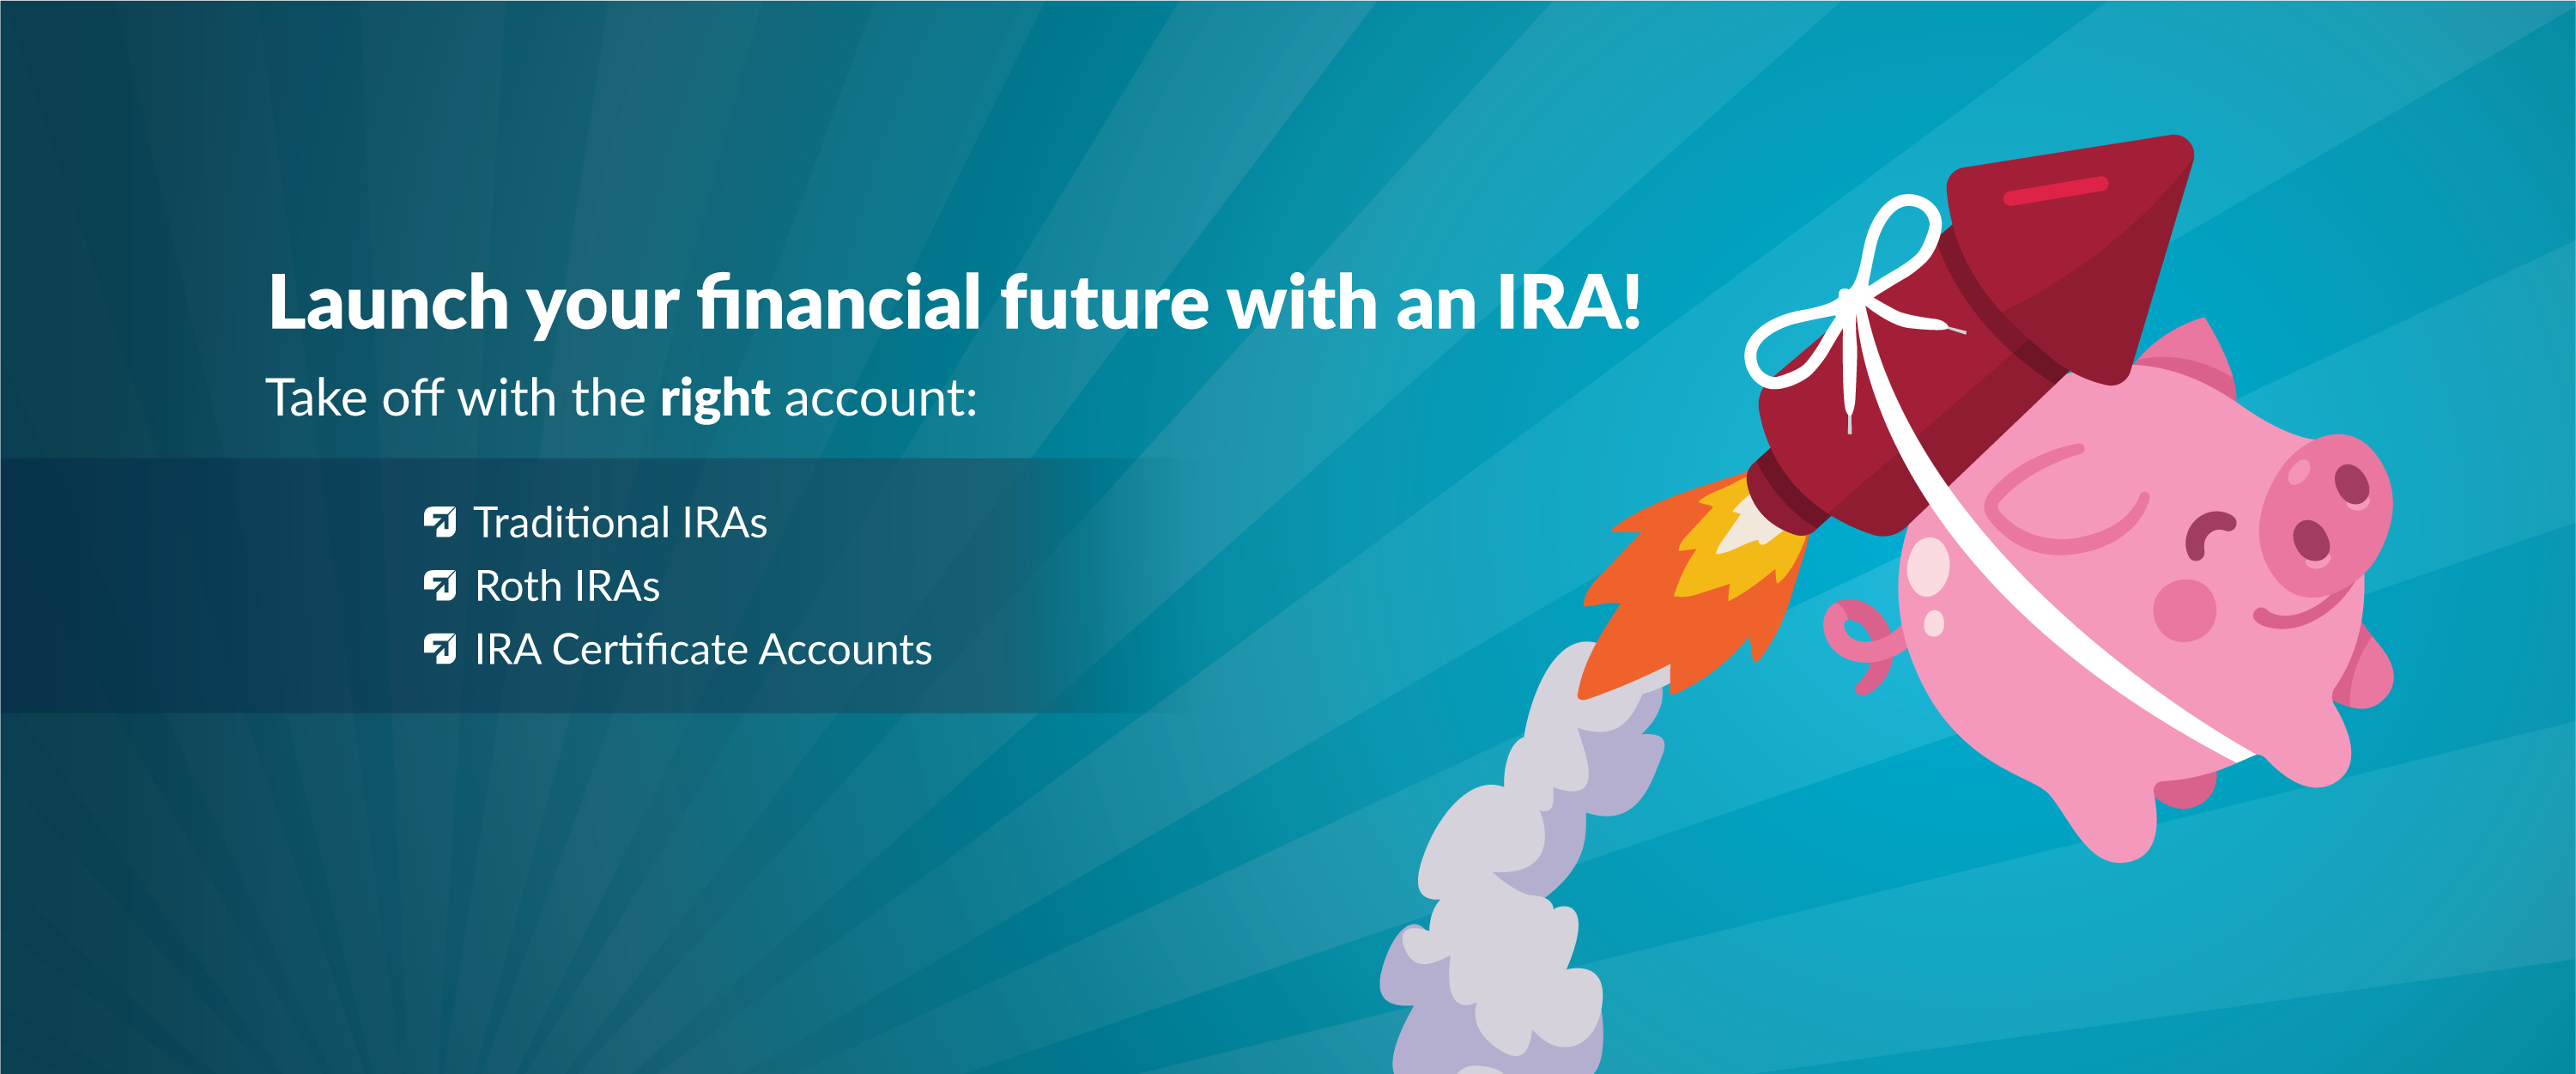 Launch your financial future with an IRA!